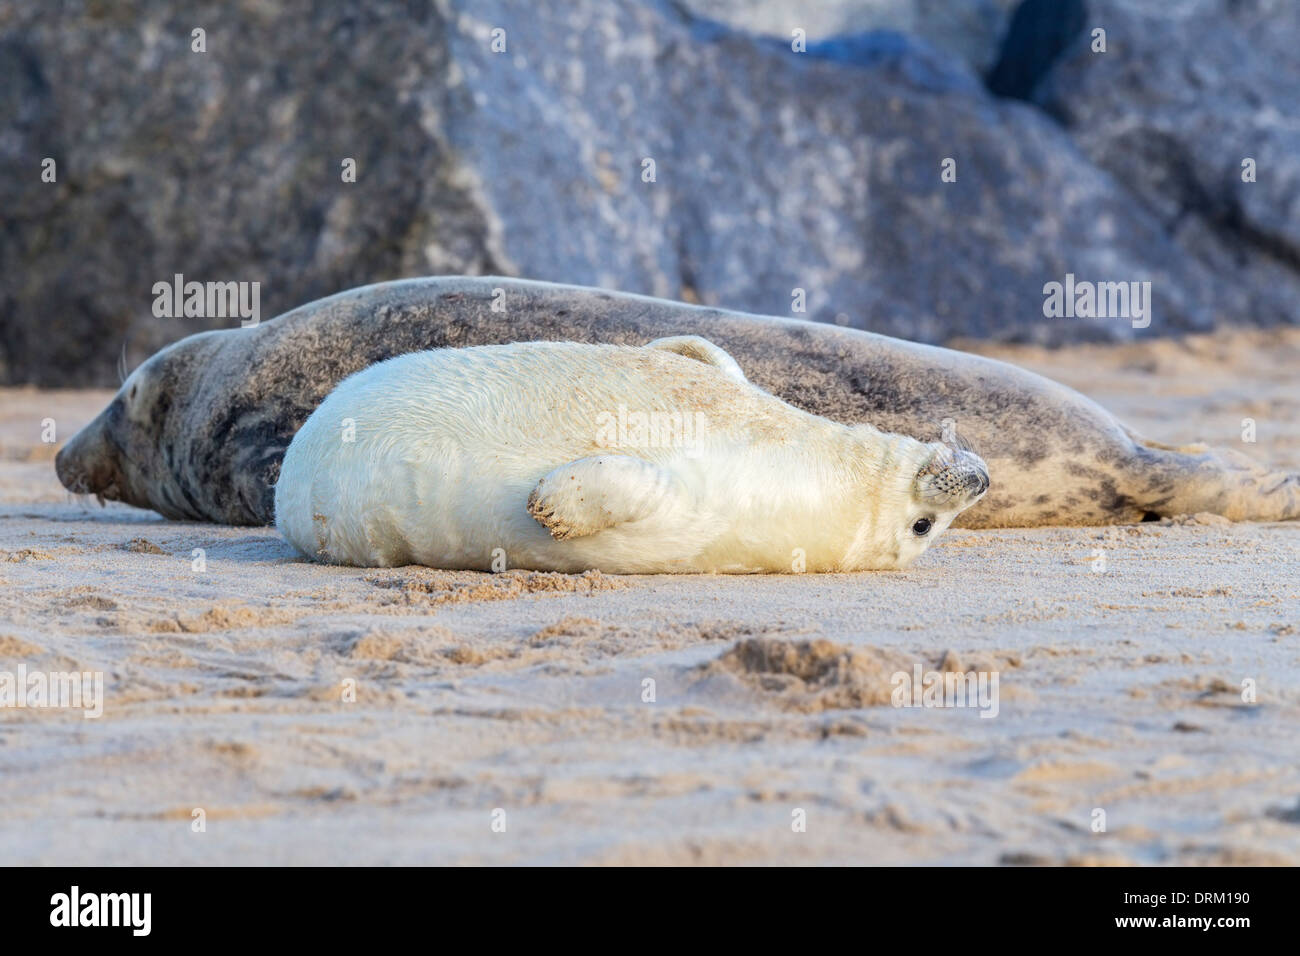 A Grey seal seal pup in white pelage sleeps alongside its protective mum on the beach, North Sea coast, Norfolk, England Stock Photo